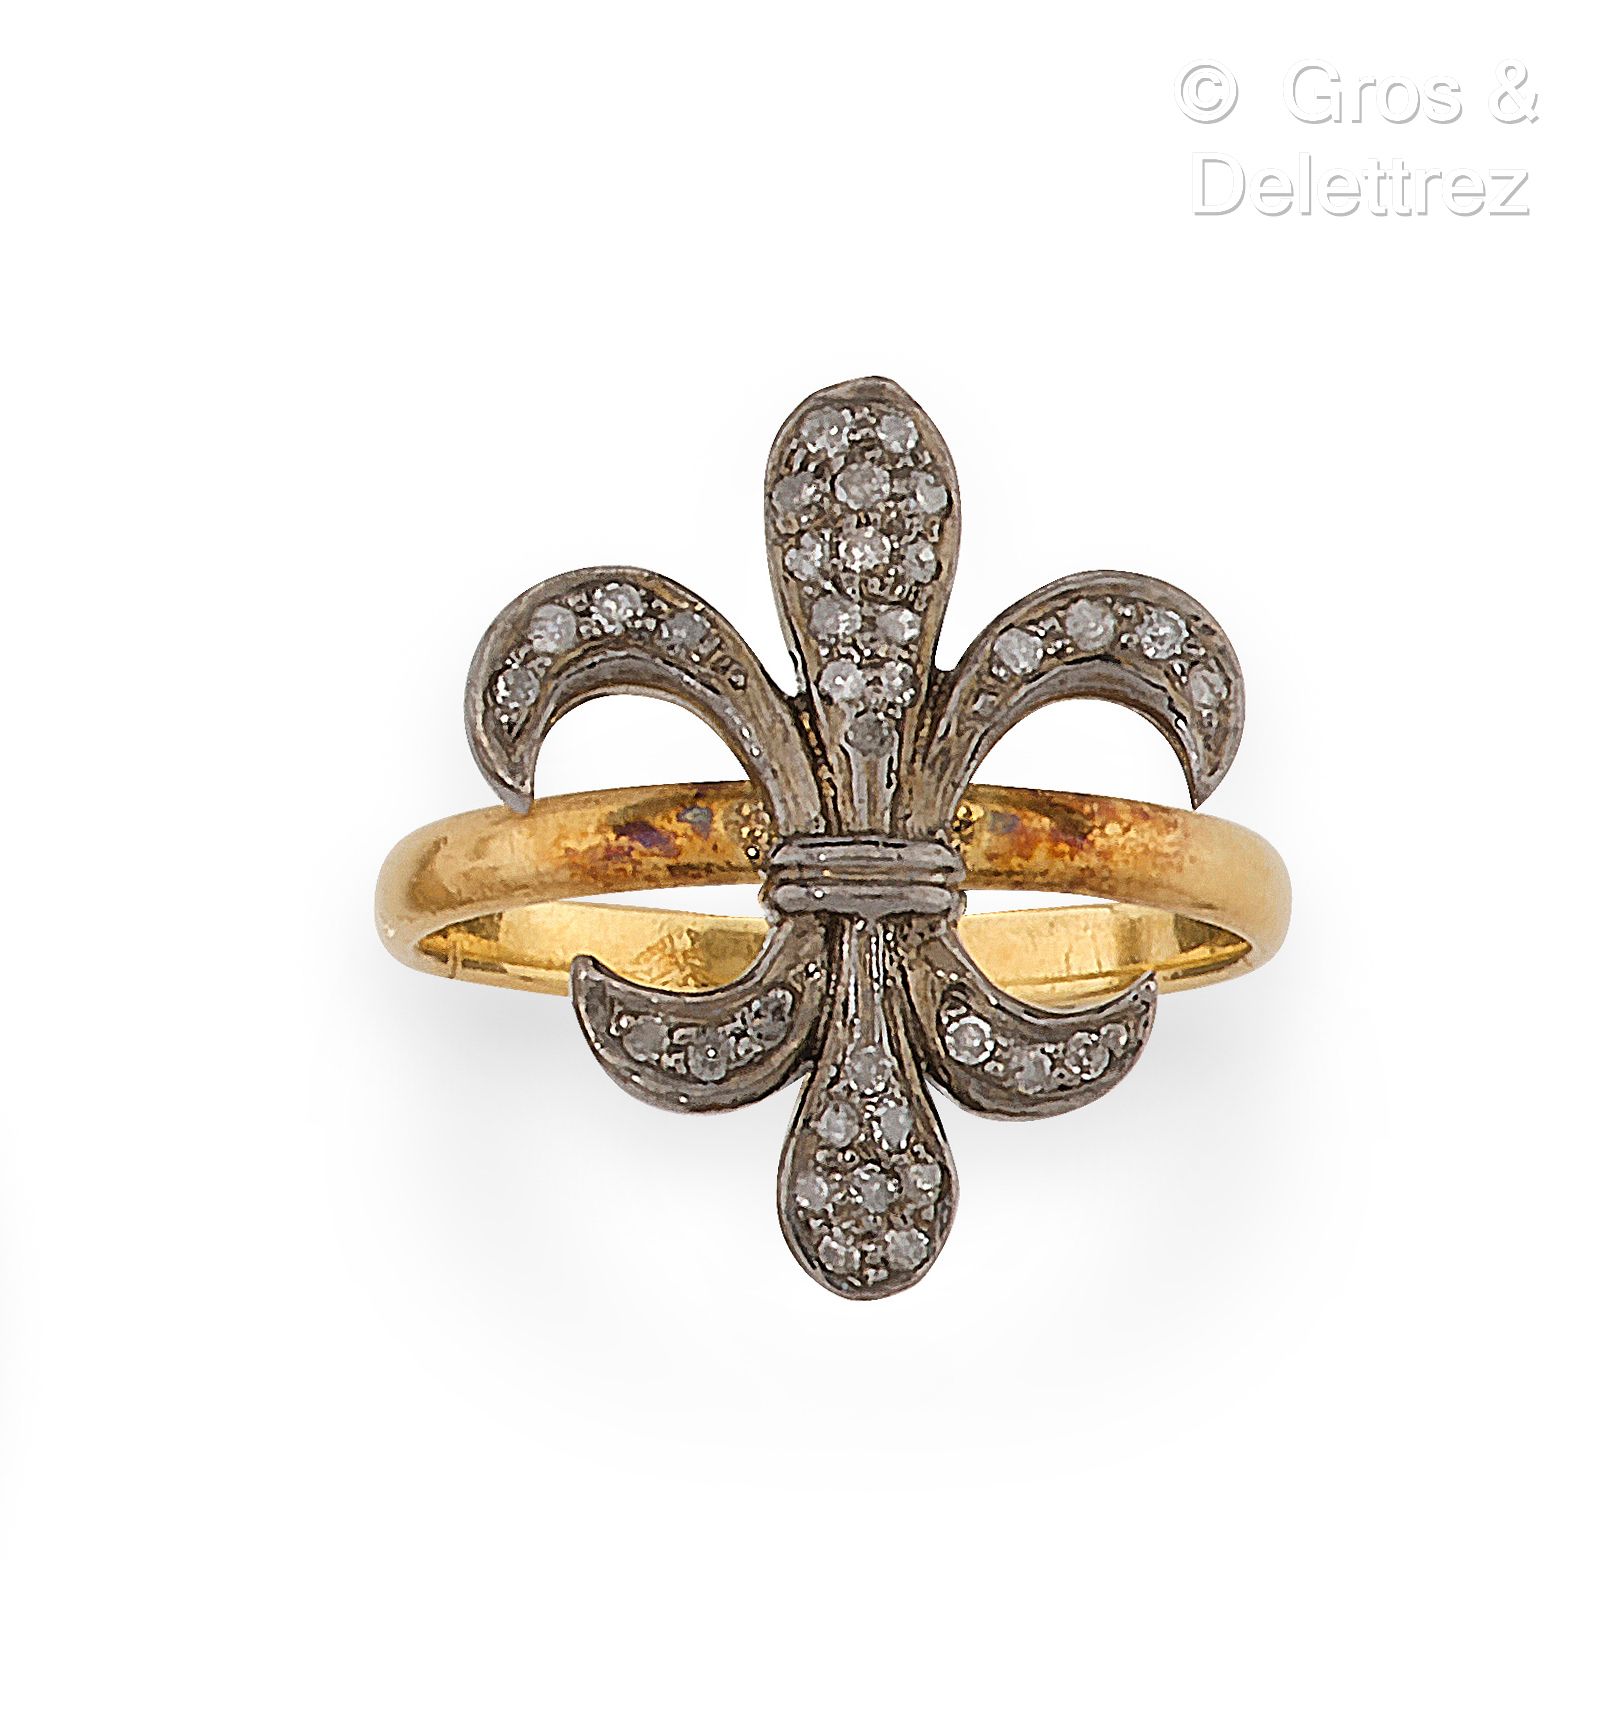 Null Ring "Fleur de lys" in yellow gold and silver. The design is set with brill&hellip;